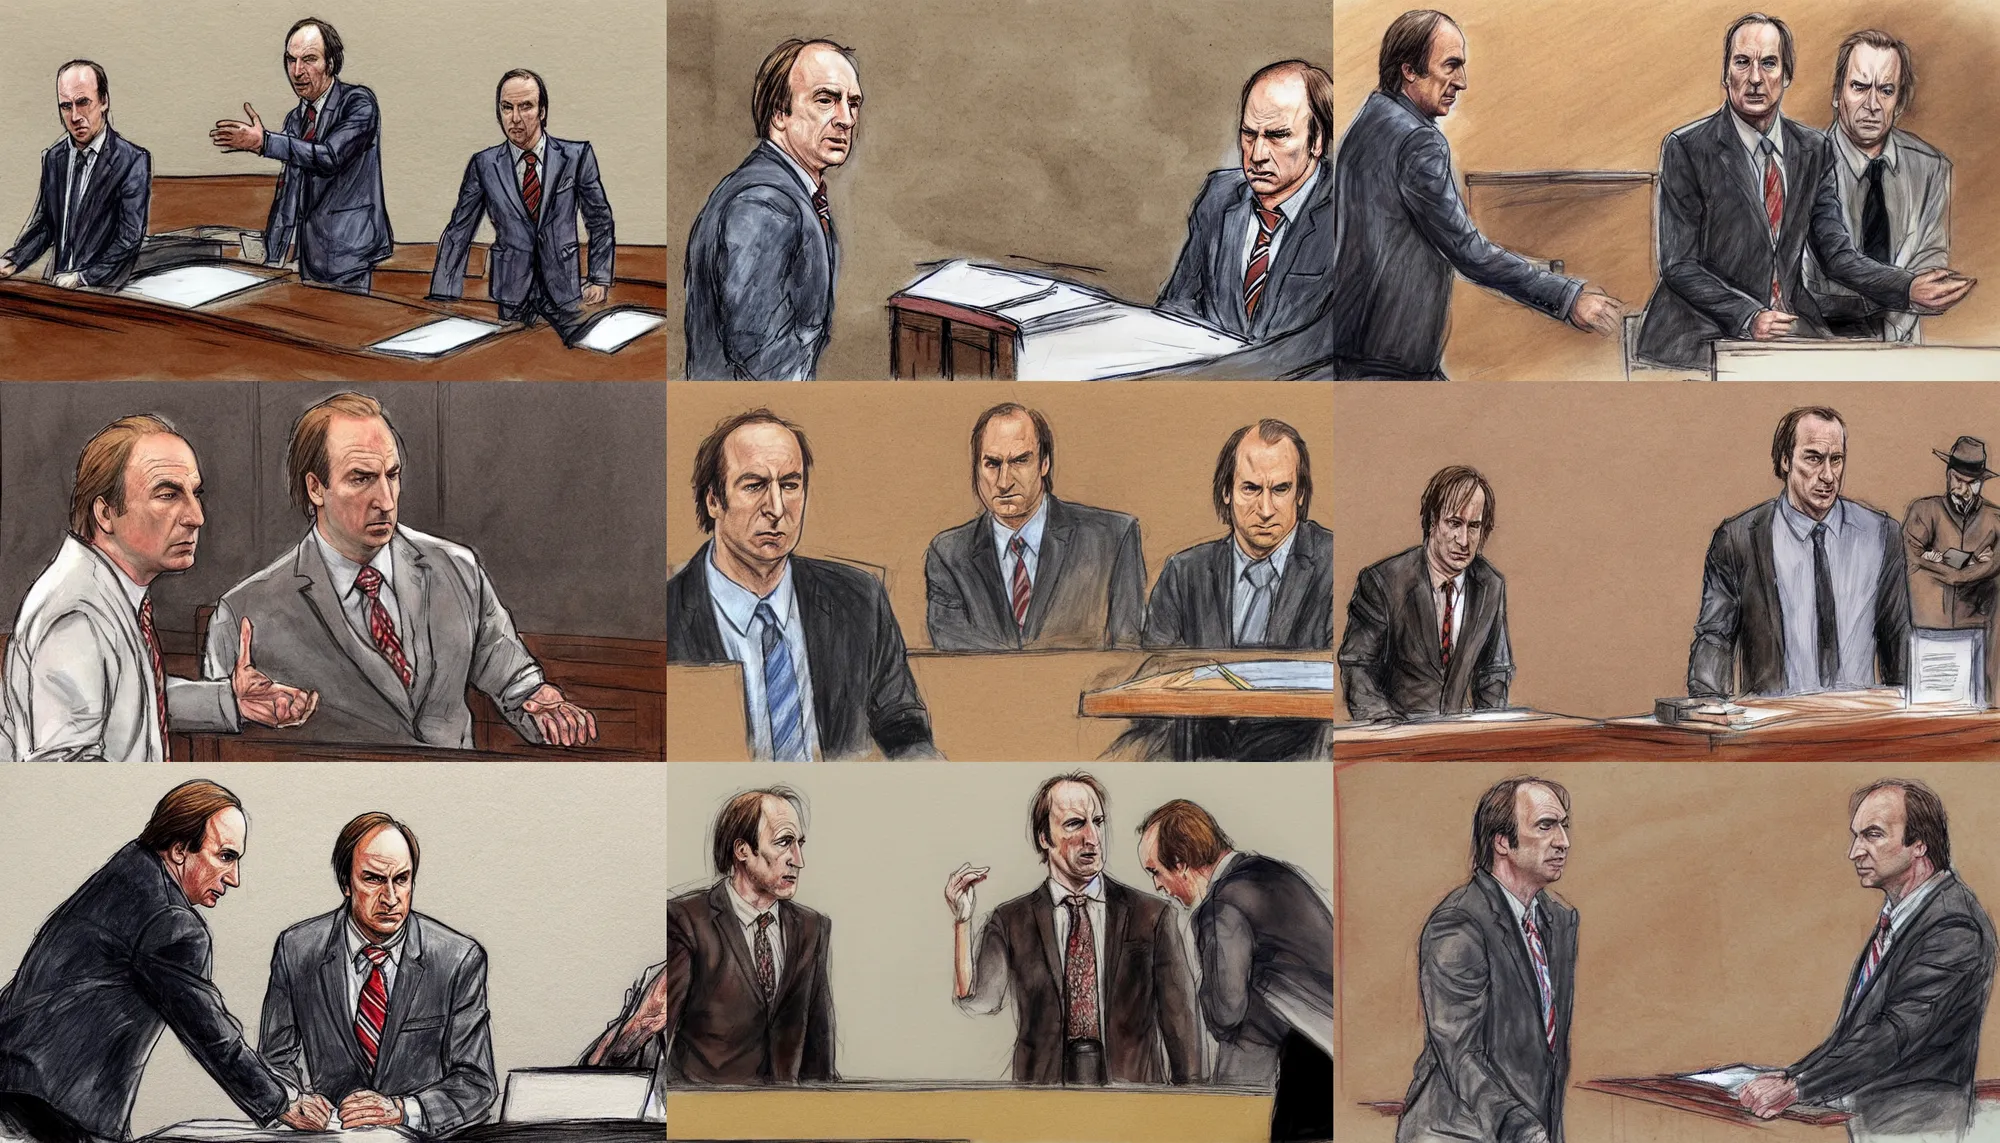 Prompt: Saul Goodman played by Bob Odenkirk defending Freddy Krueger in court, courtroom sketch